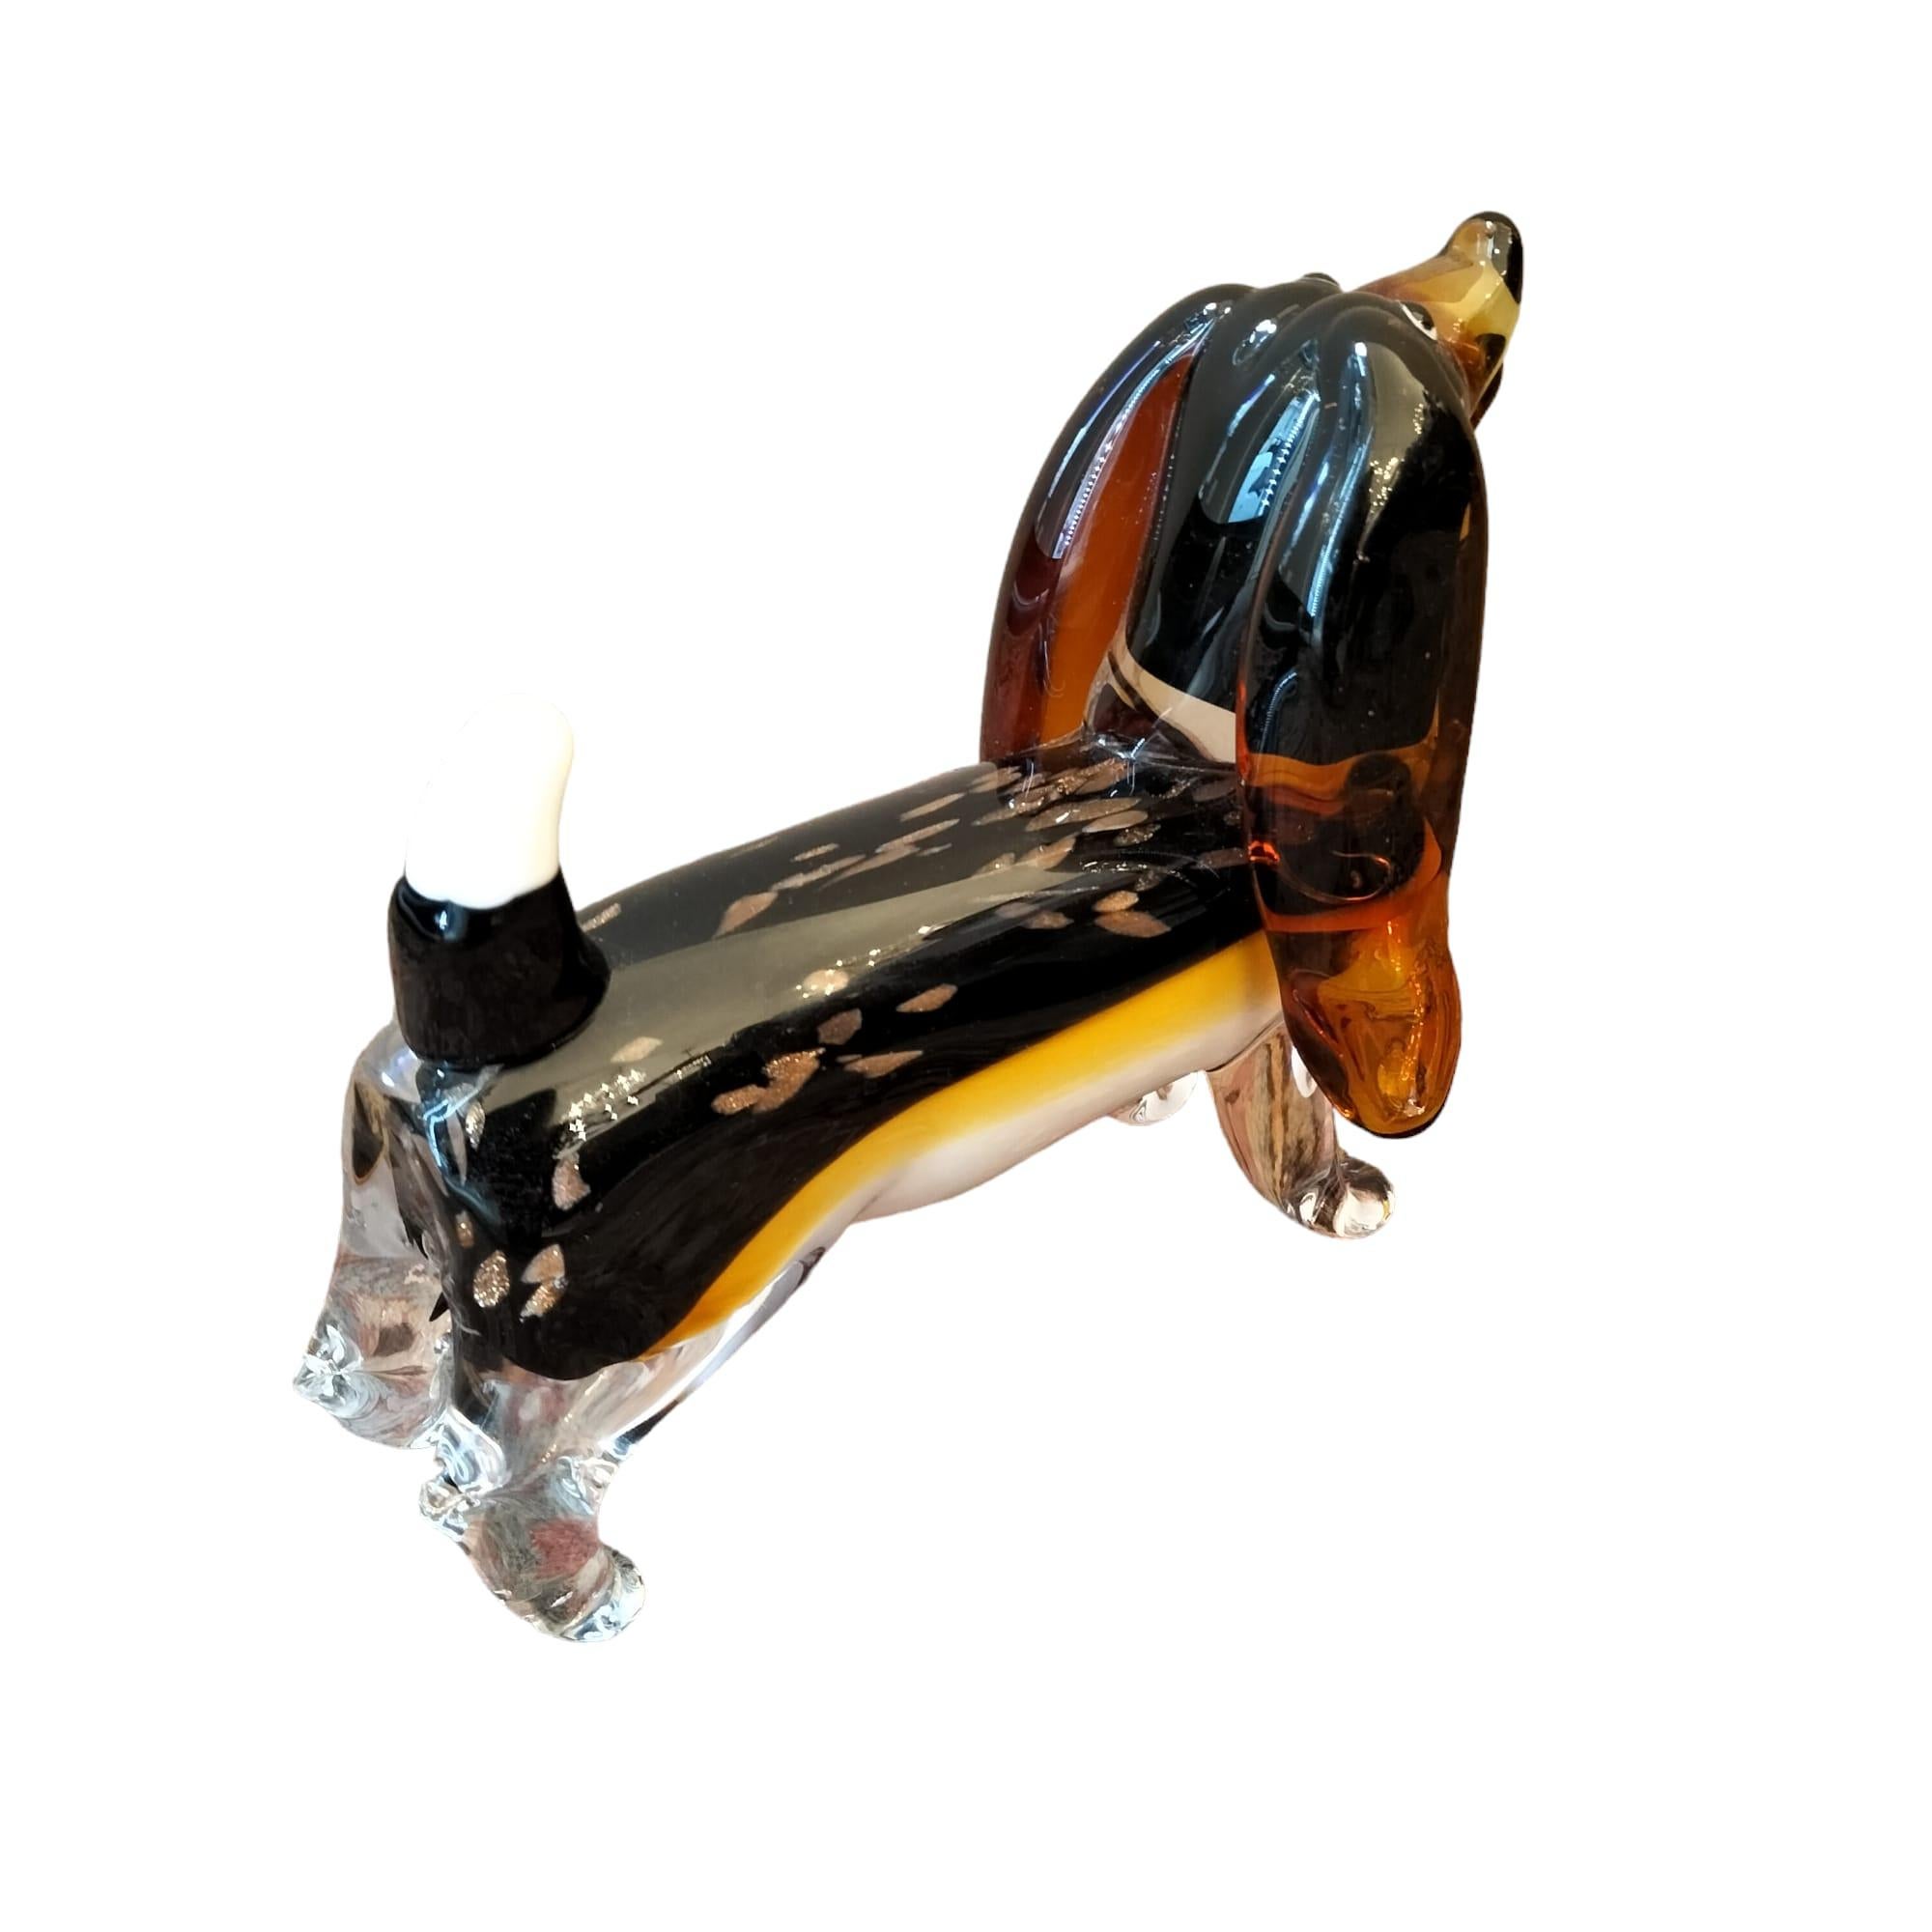 This beautiful animal sculpture, depicting a sausage dog made from Murano glass in vibrant brown hues, was handcrafted in the late 20th century. It bears the signature 'MURANO' discreetly placed on the dog's stomach. The craftsmanship of the glass